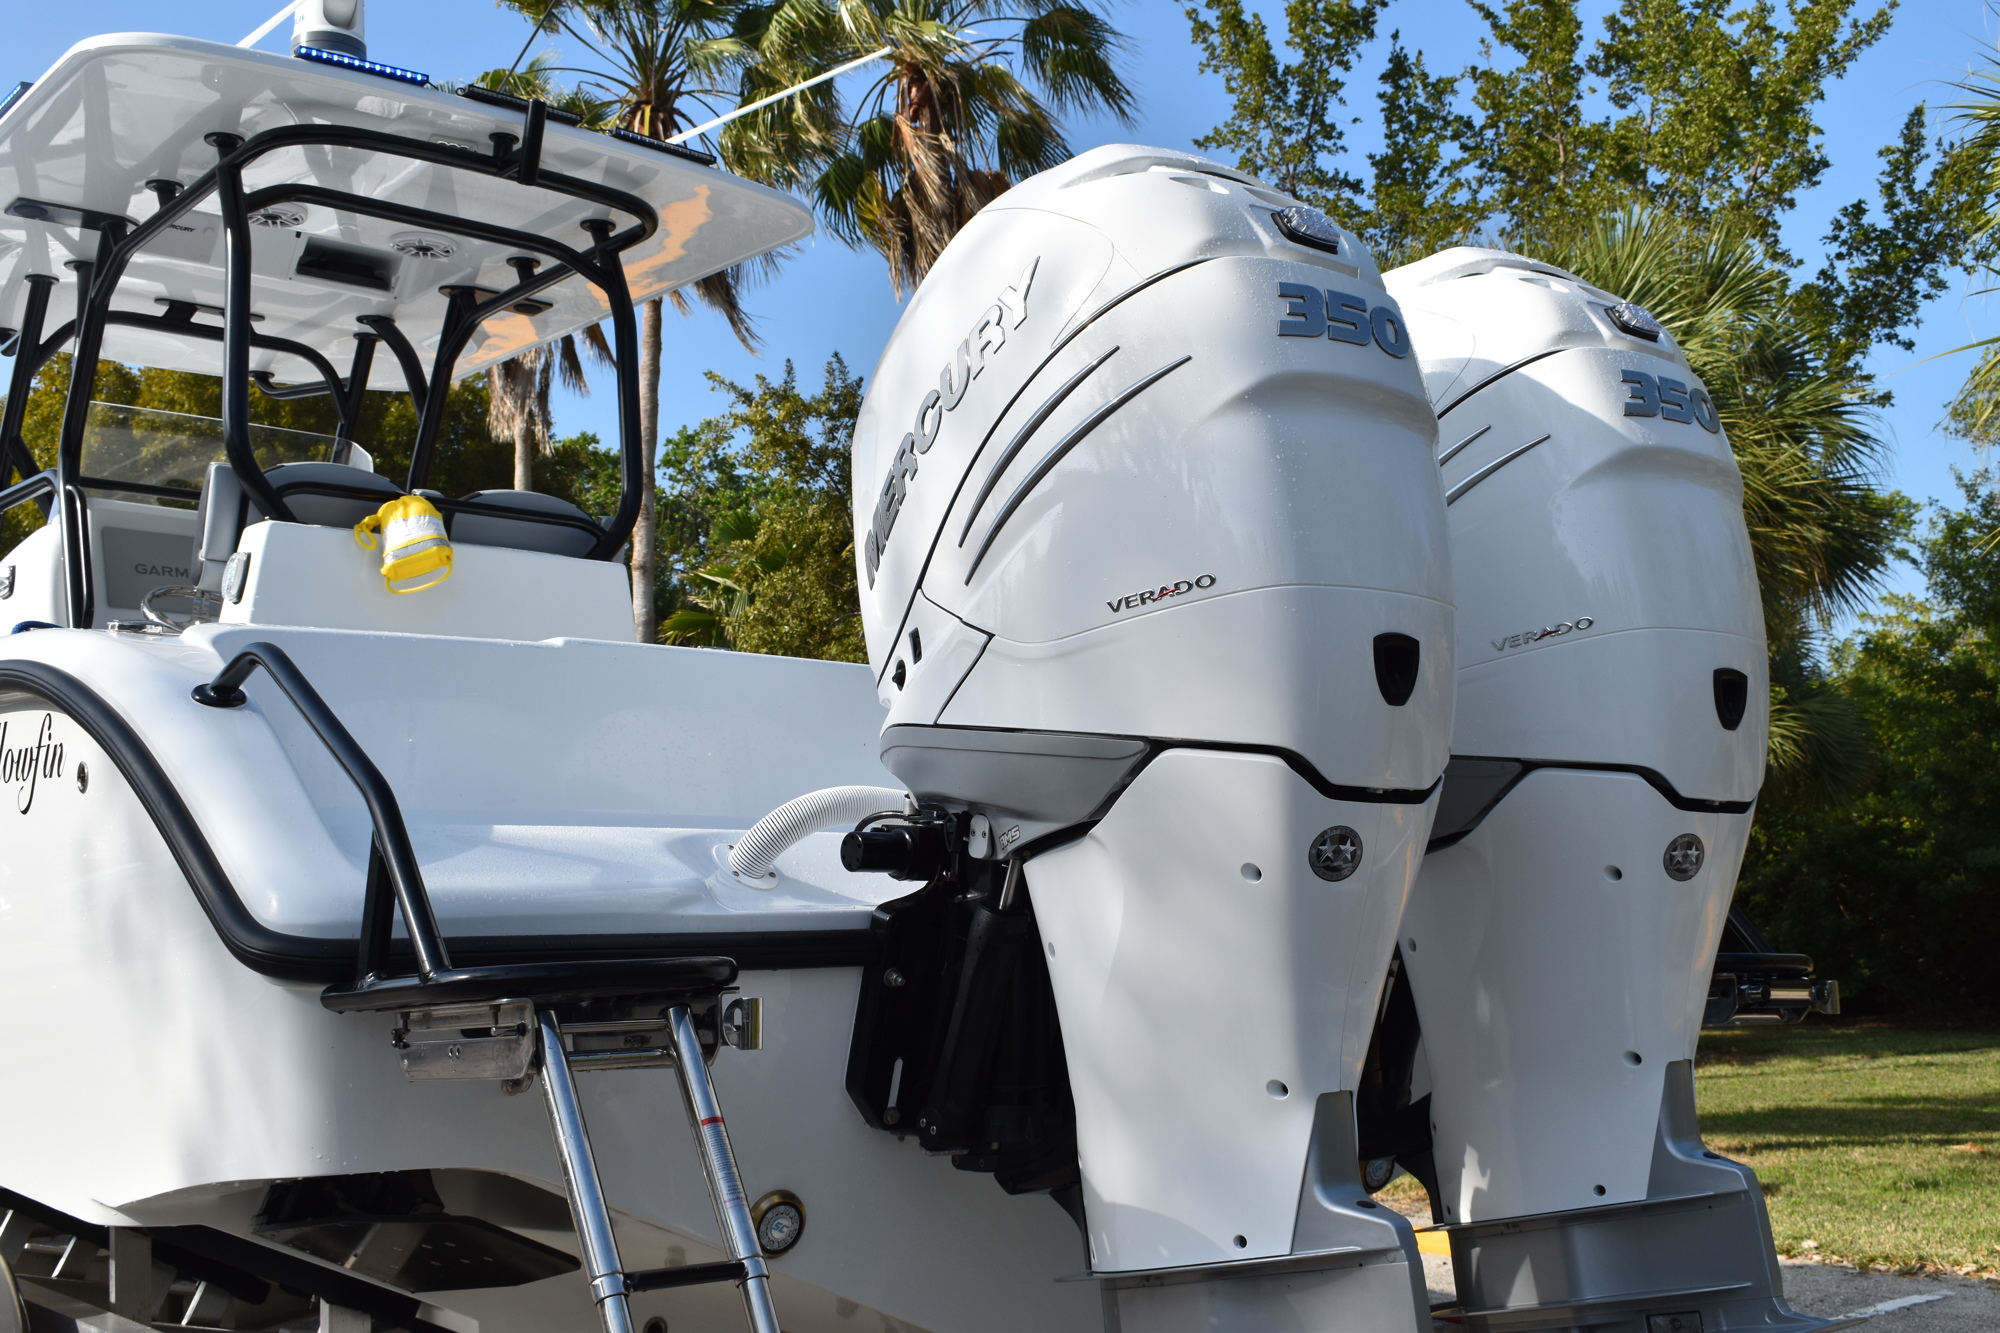 The Longboat Key Police Department's new boat has two Mercury 350 horsepower engines. The boat has a top speed of about 60 mph.